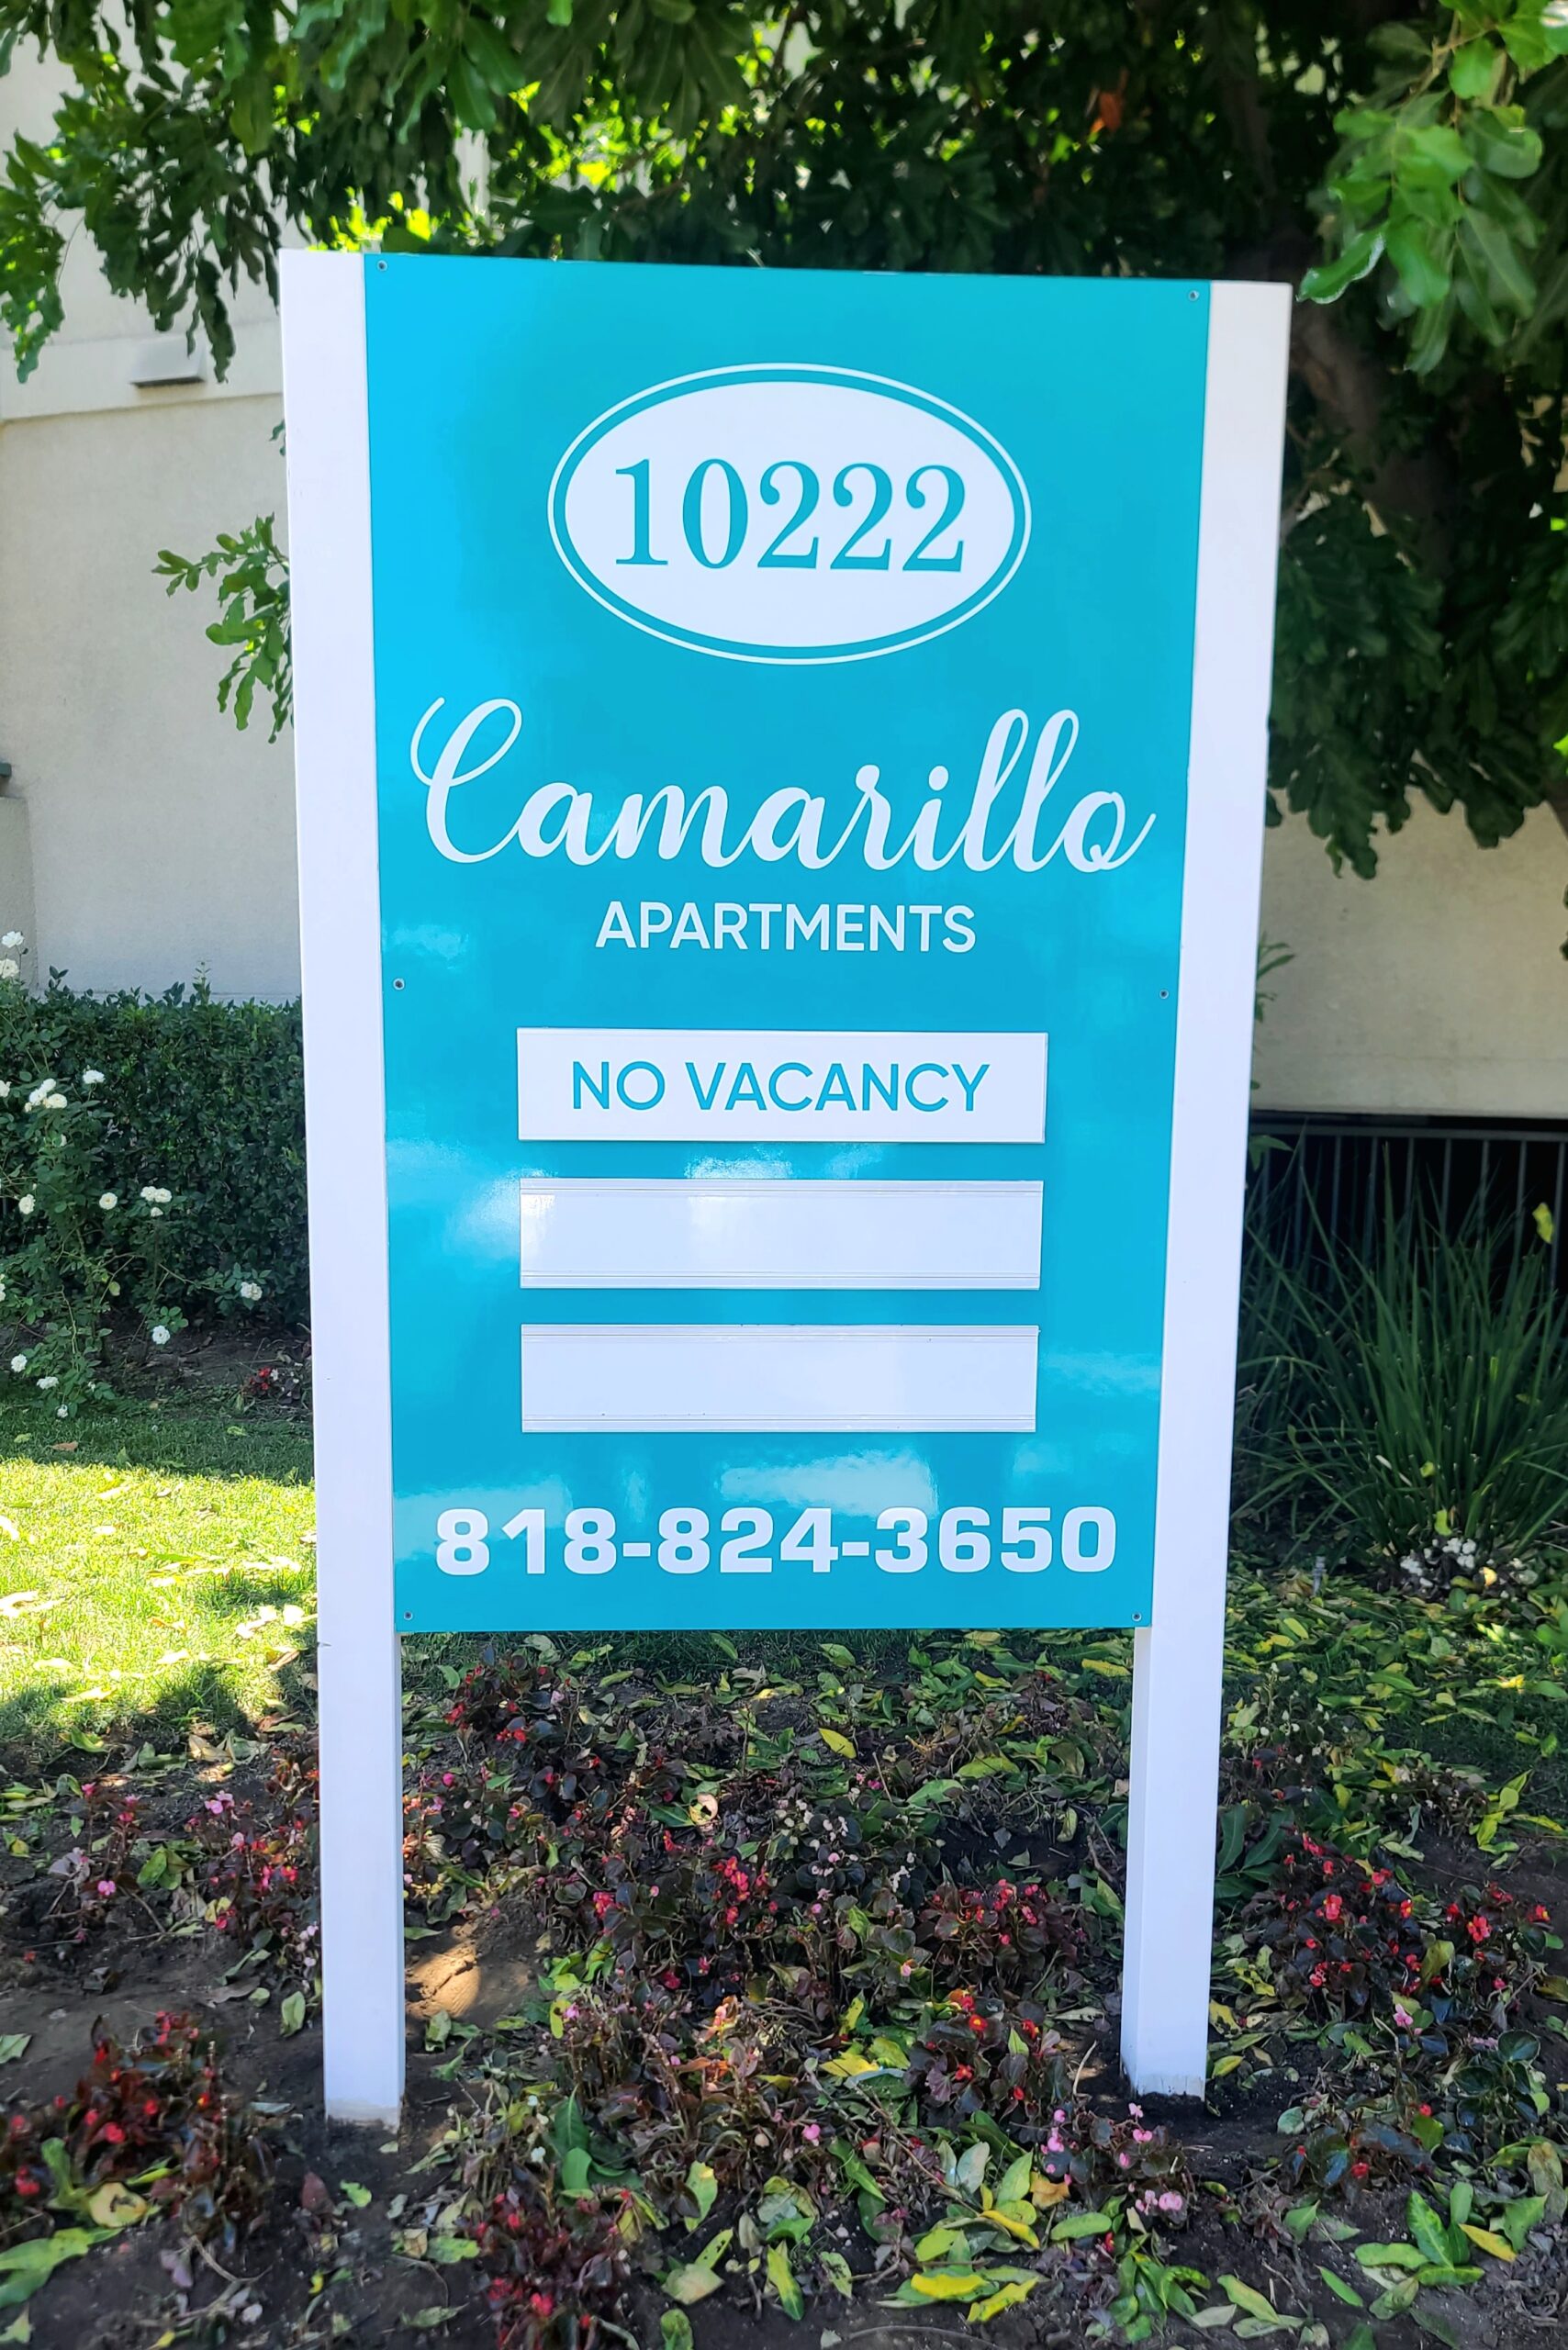 Clear and visible informative apartments sign